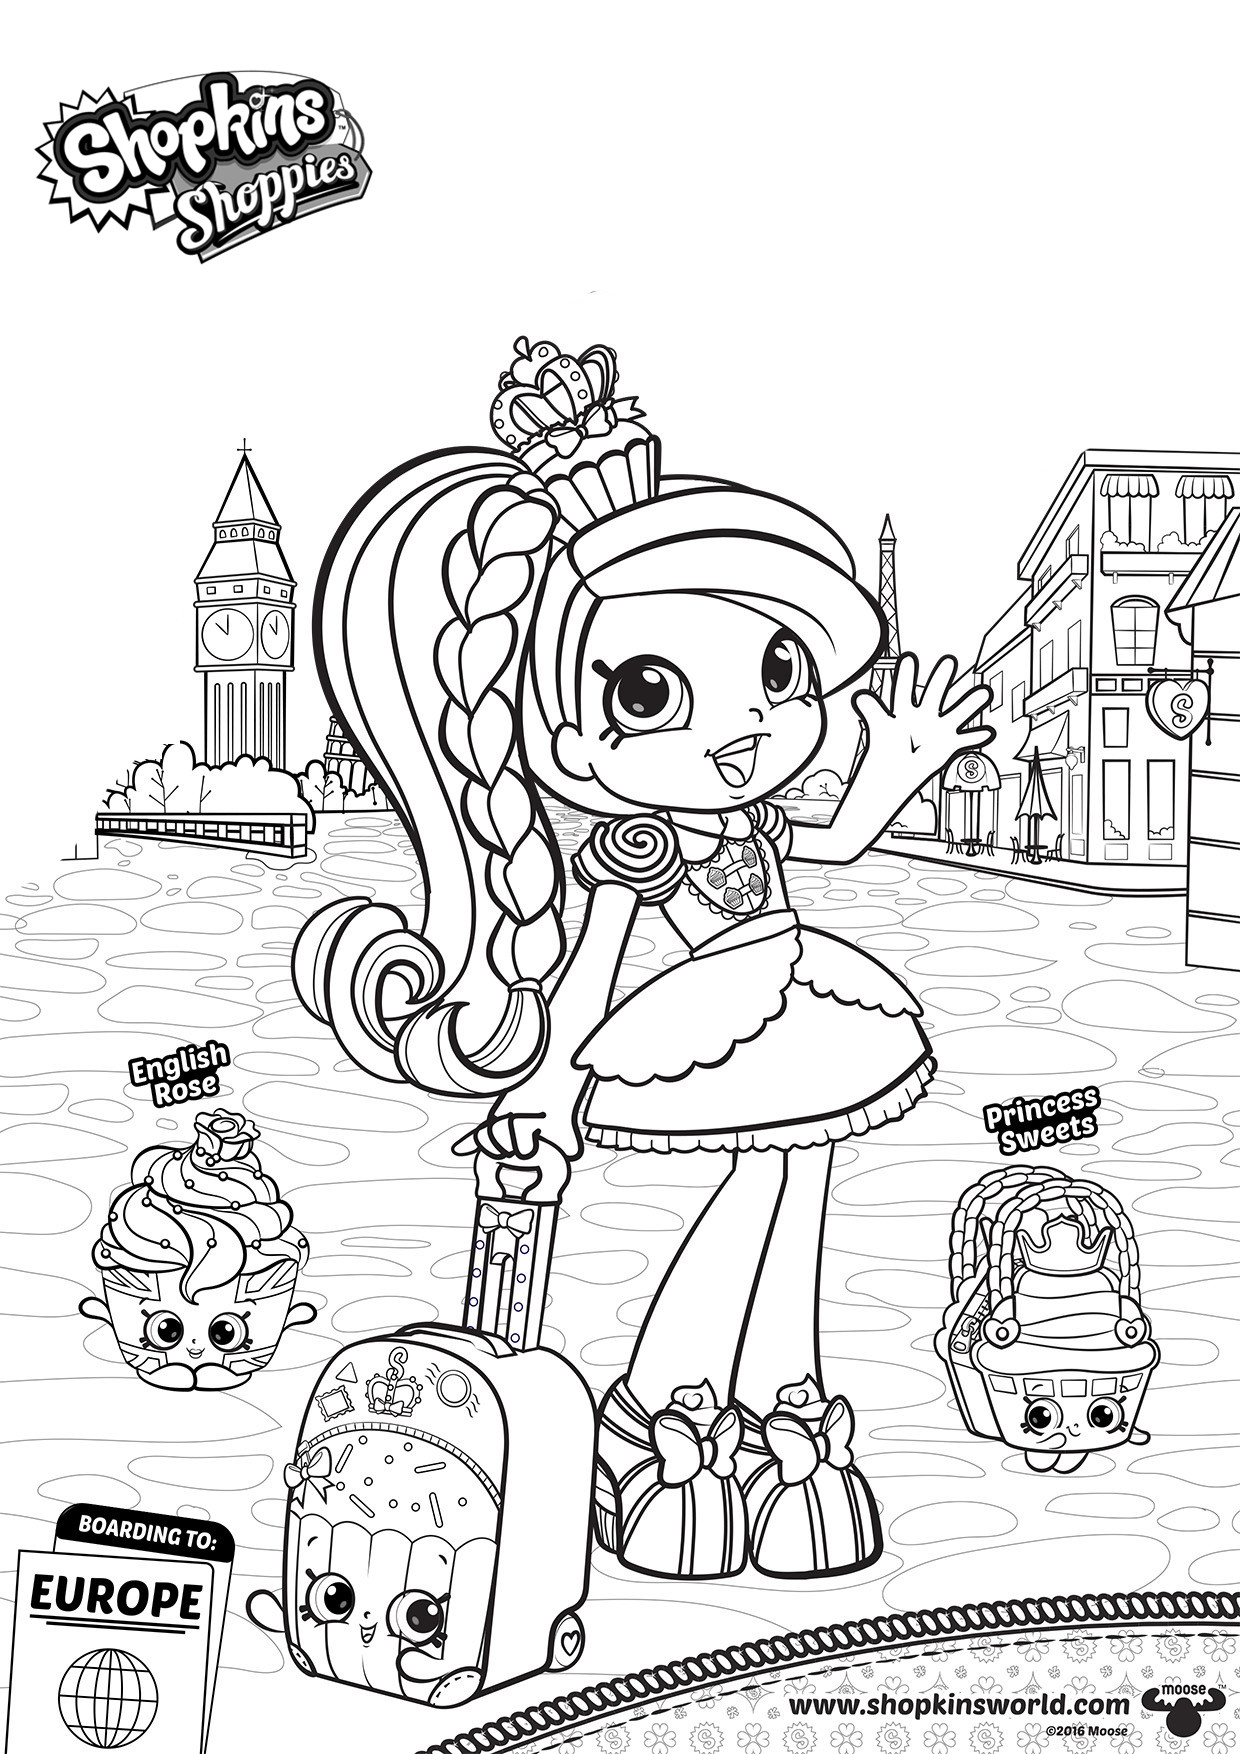 S Hopkins World Vacation Coloring Page Coloring Pages